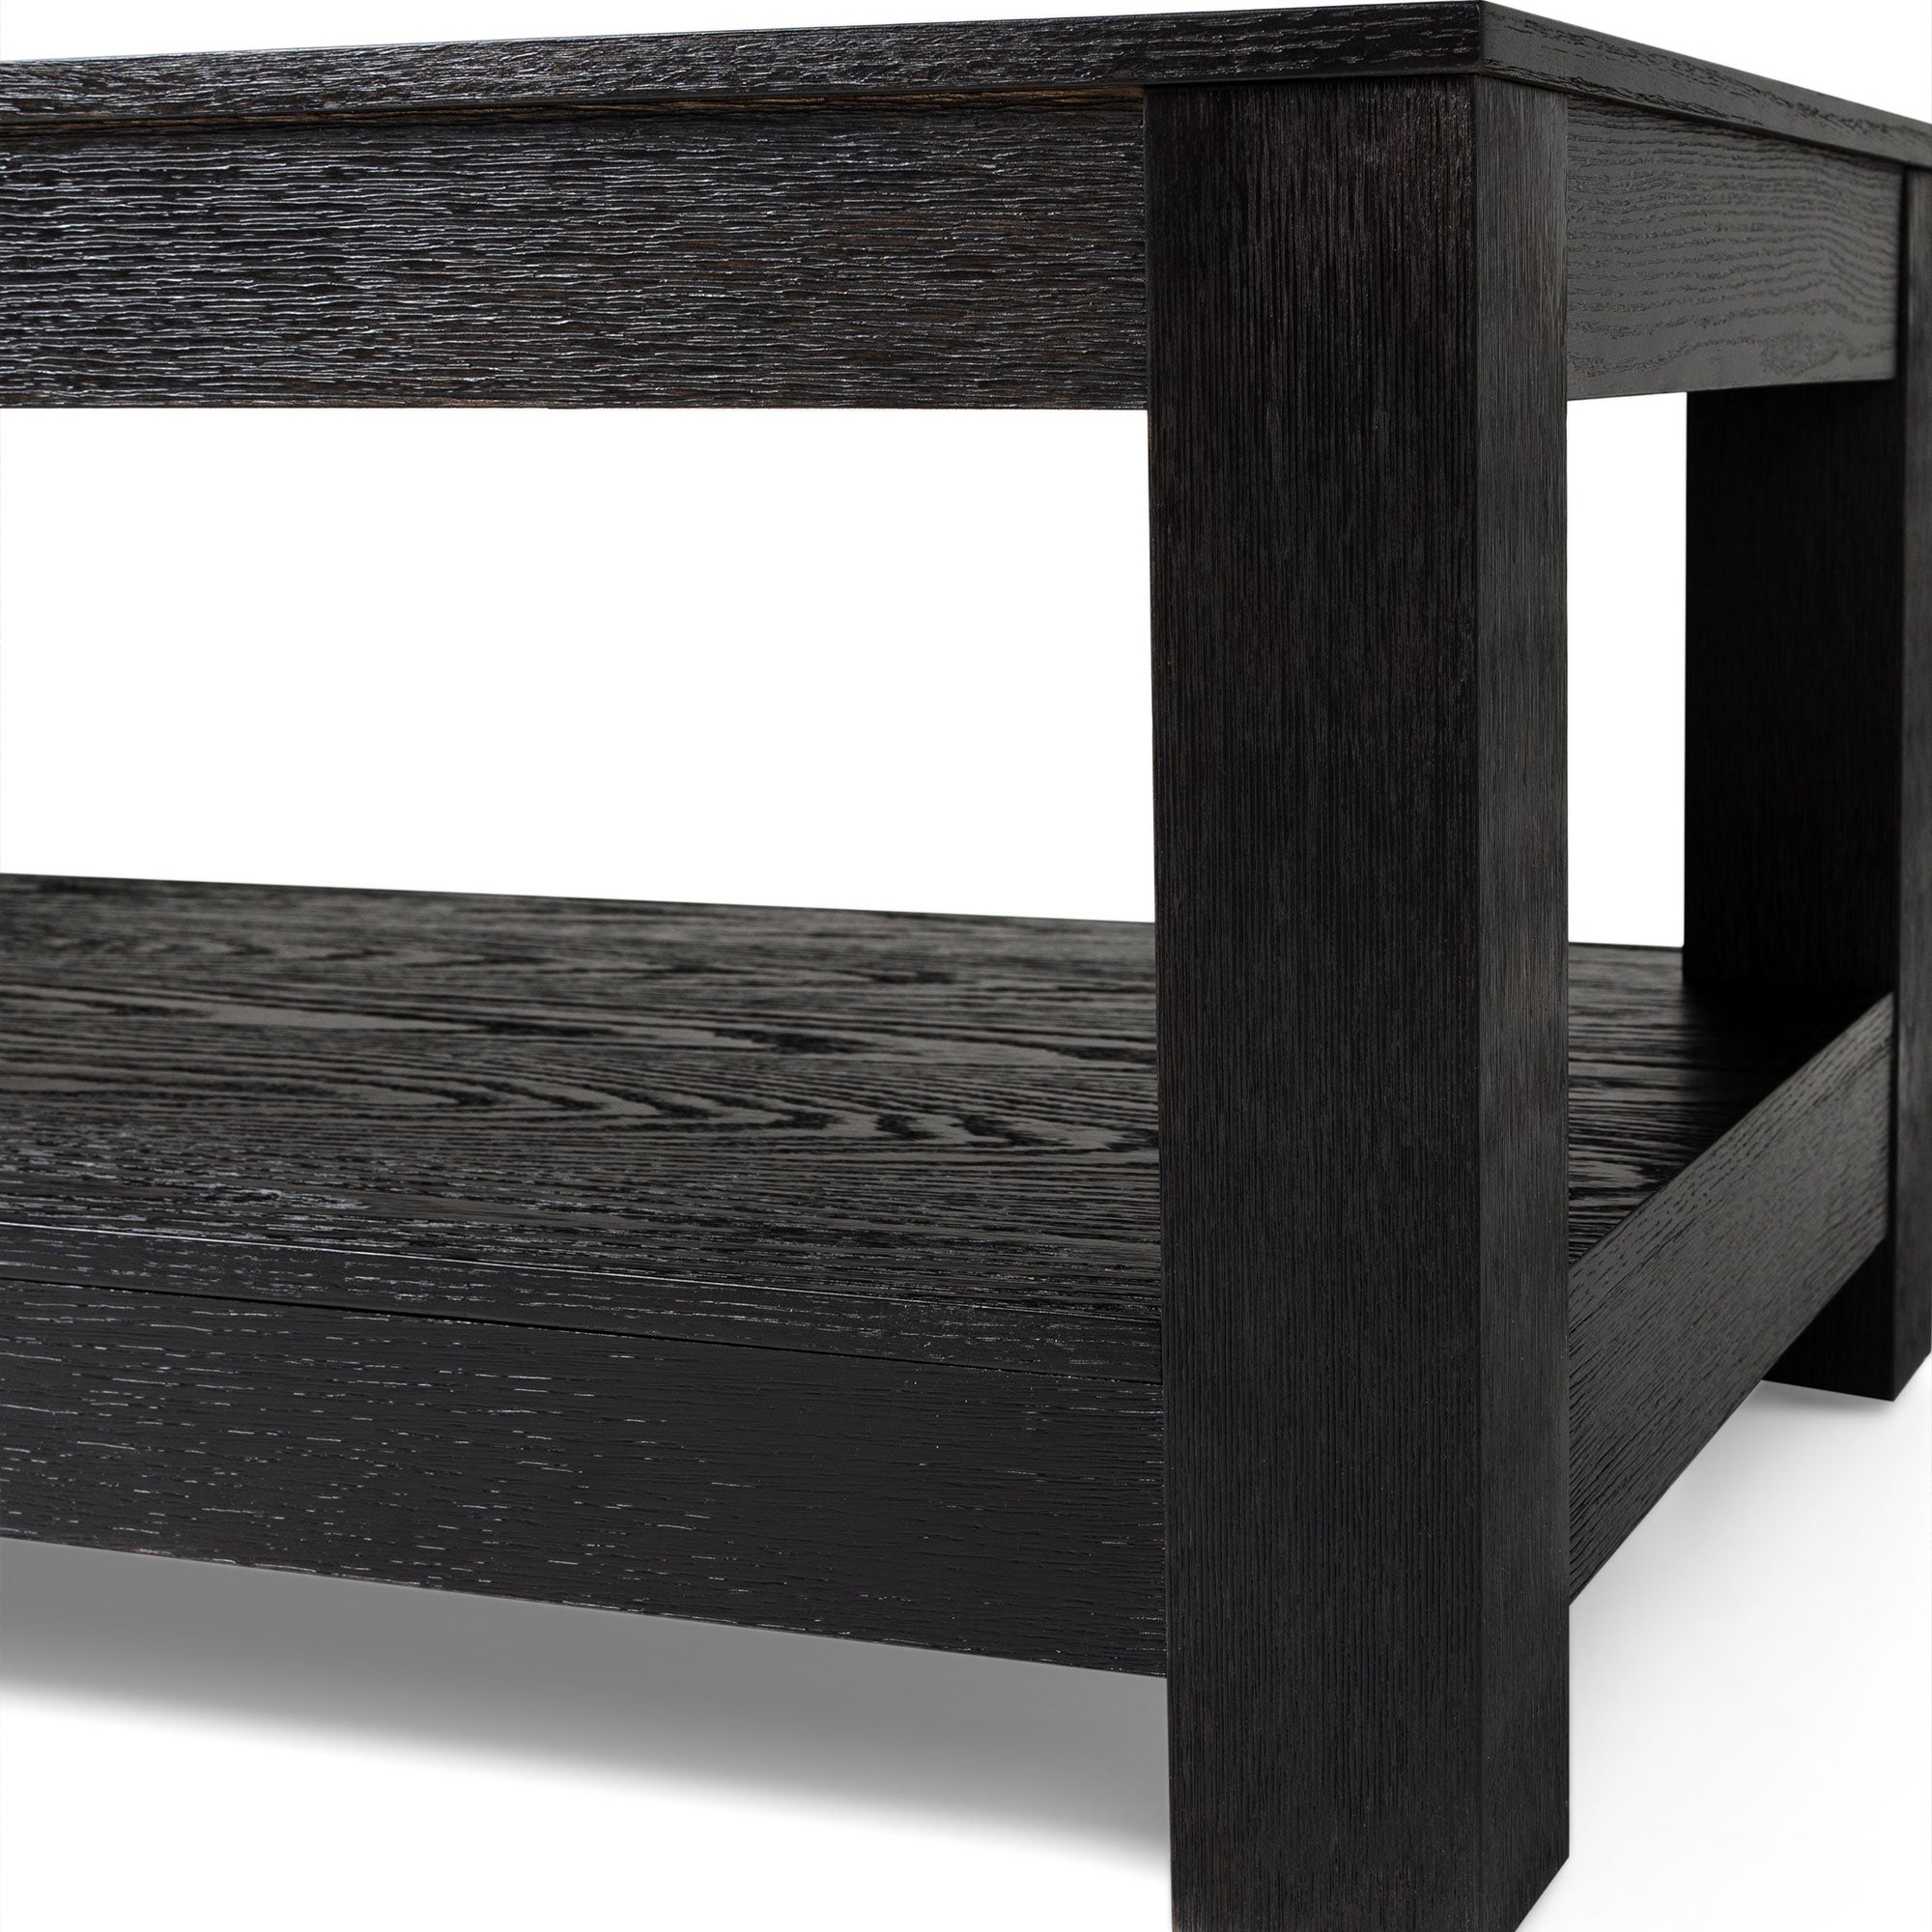 Paulo Wooden Coffee Table in Weathered Black Finish in Accent Tables by Maven Lane